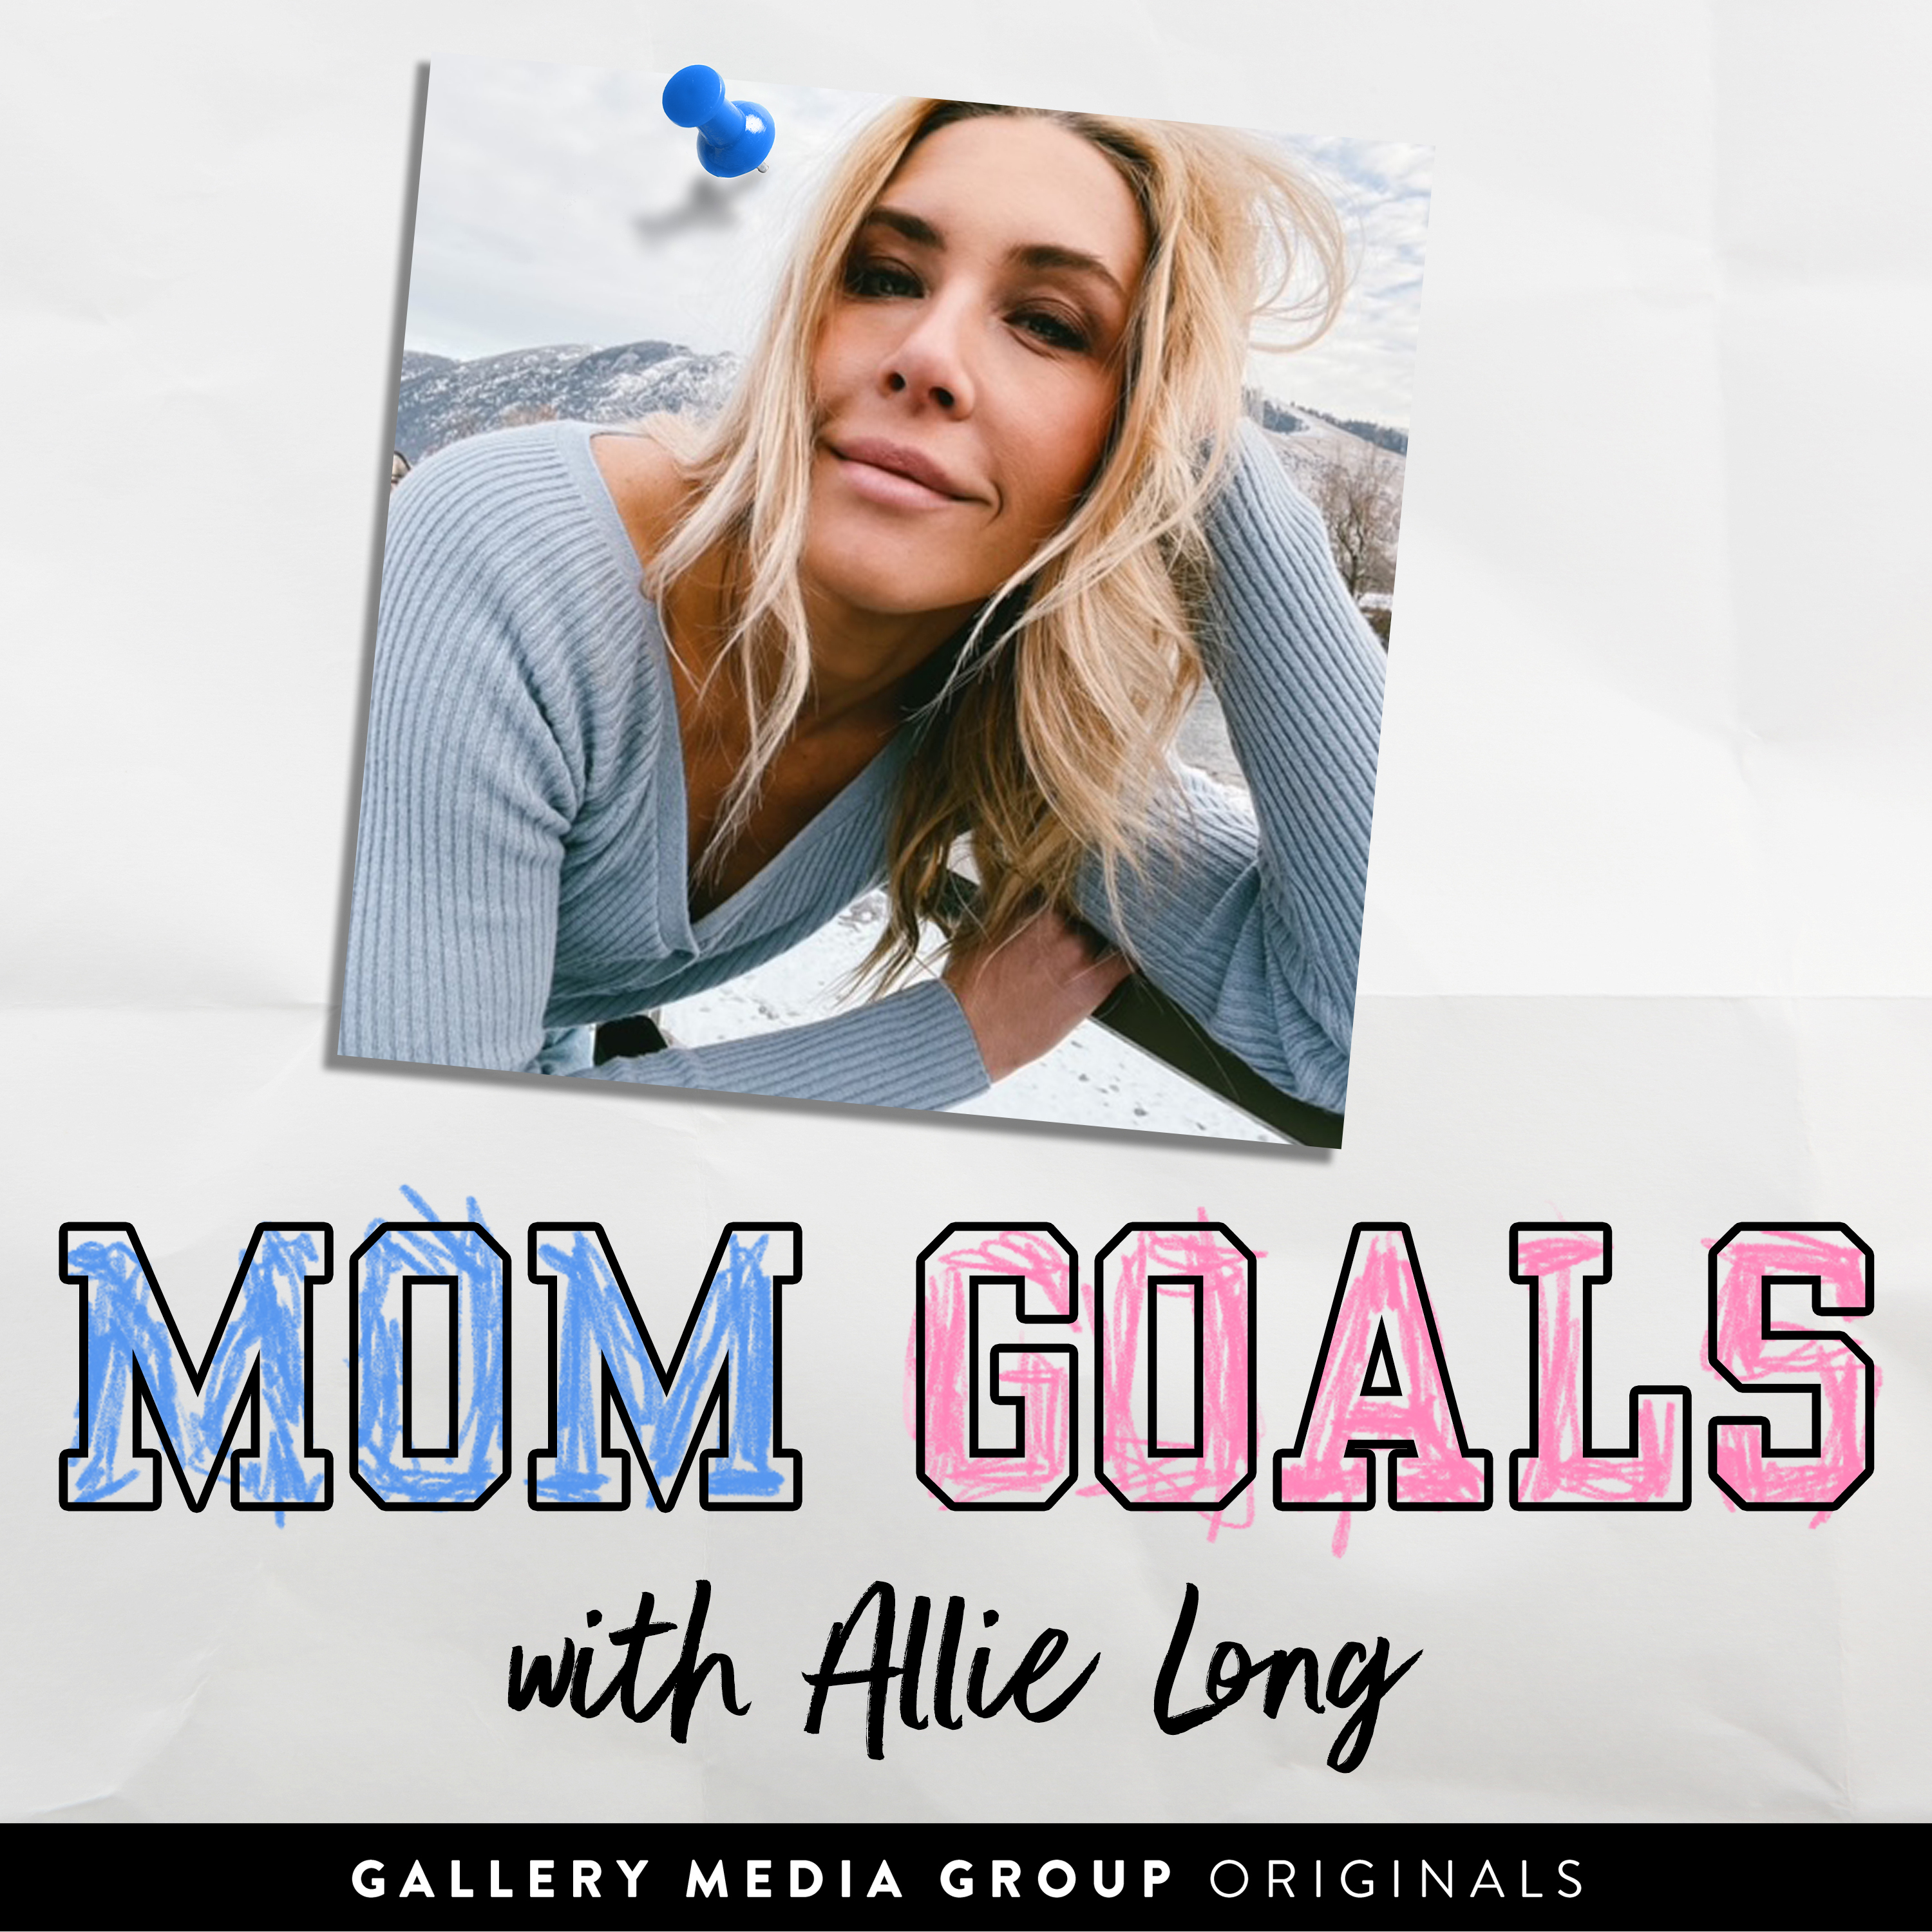 Mom Goals with Allie Long